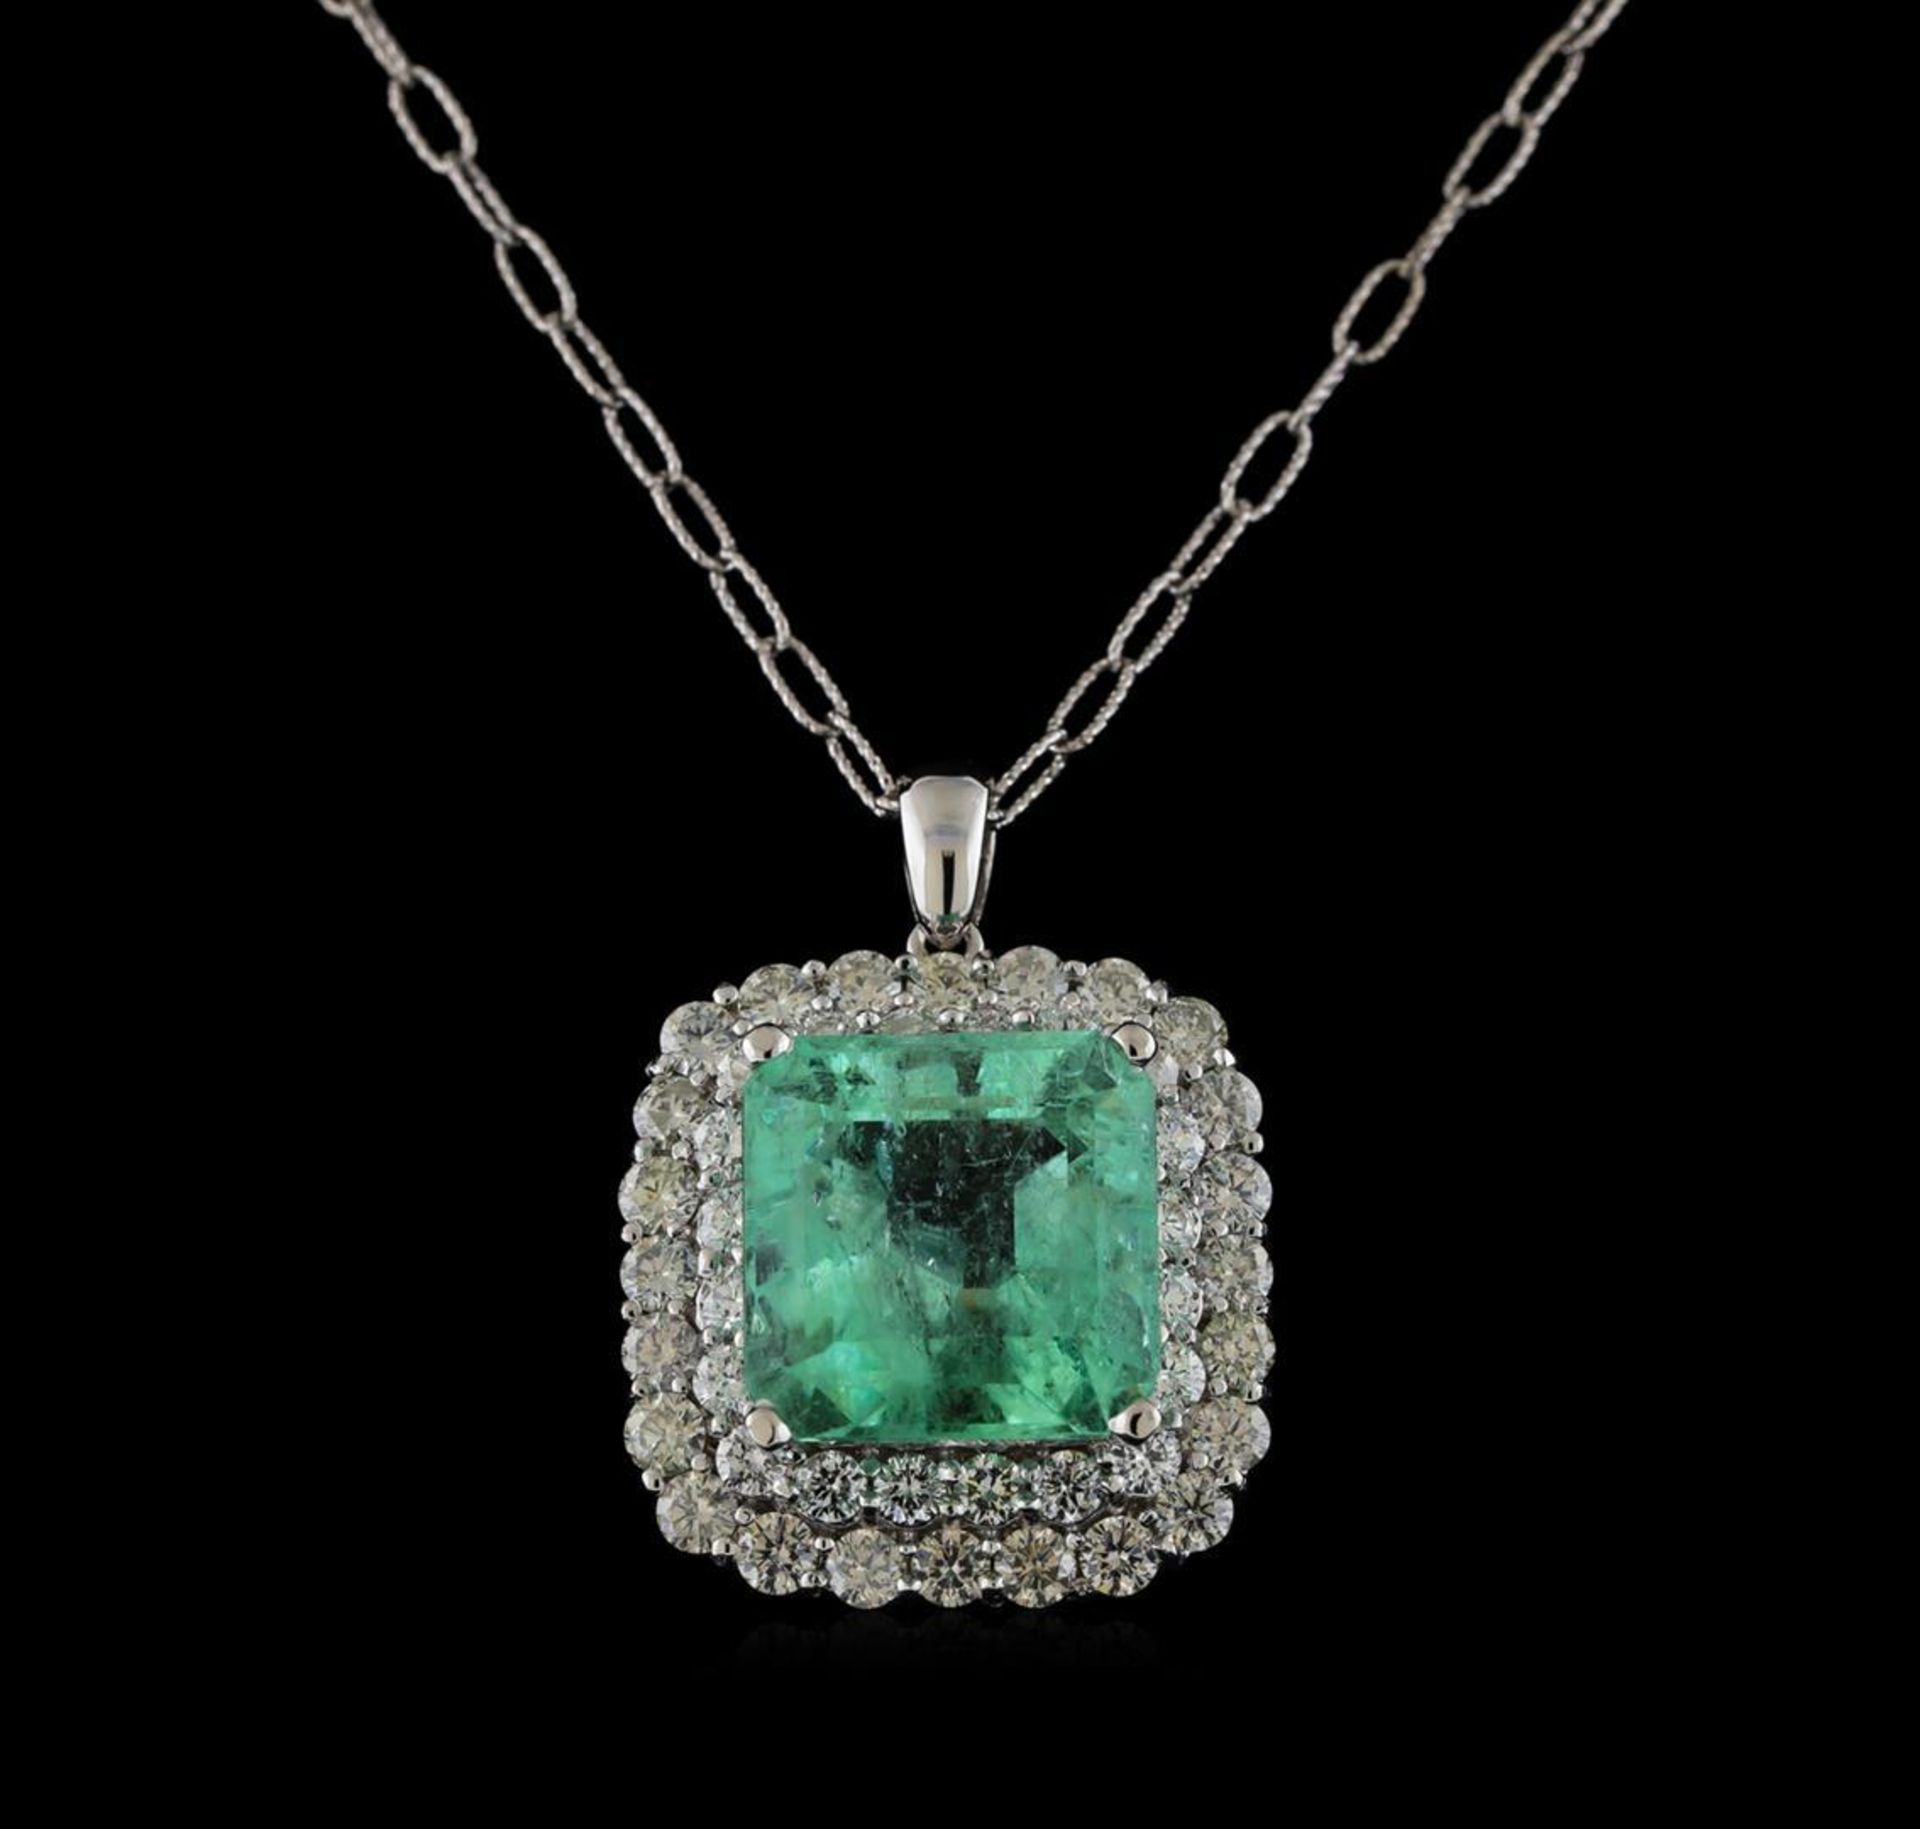 18.09 ctw Emerald and Diamond Pendant With Chain - 14KT White Gold - Image 2 of 8